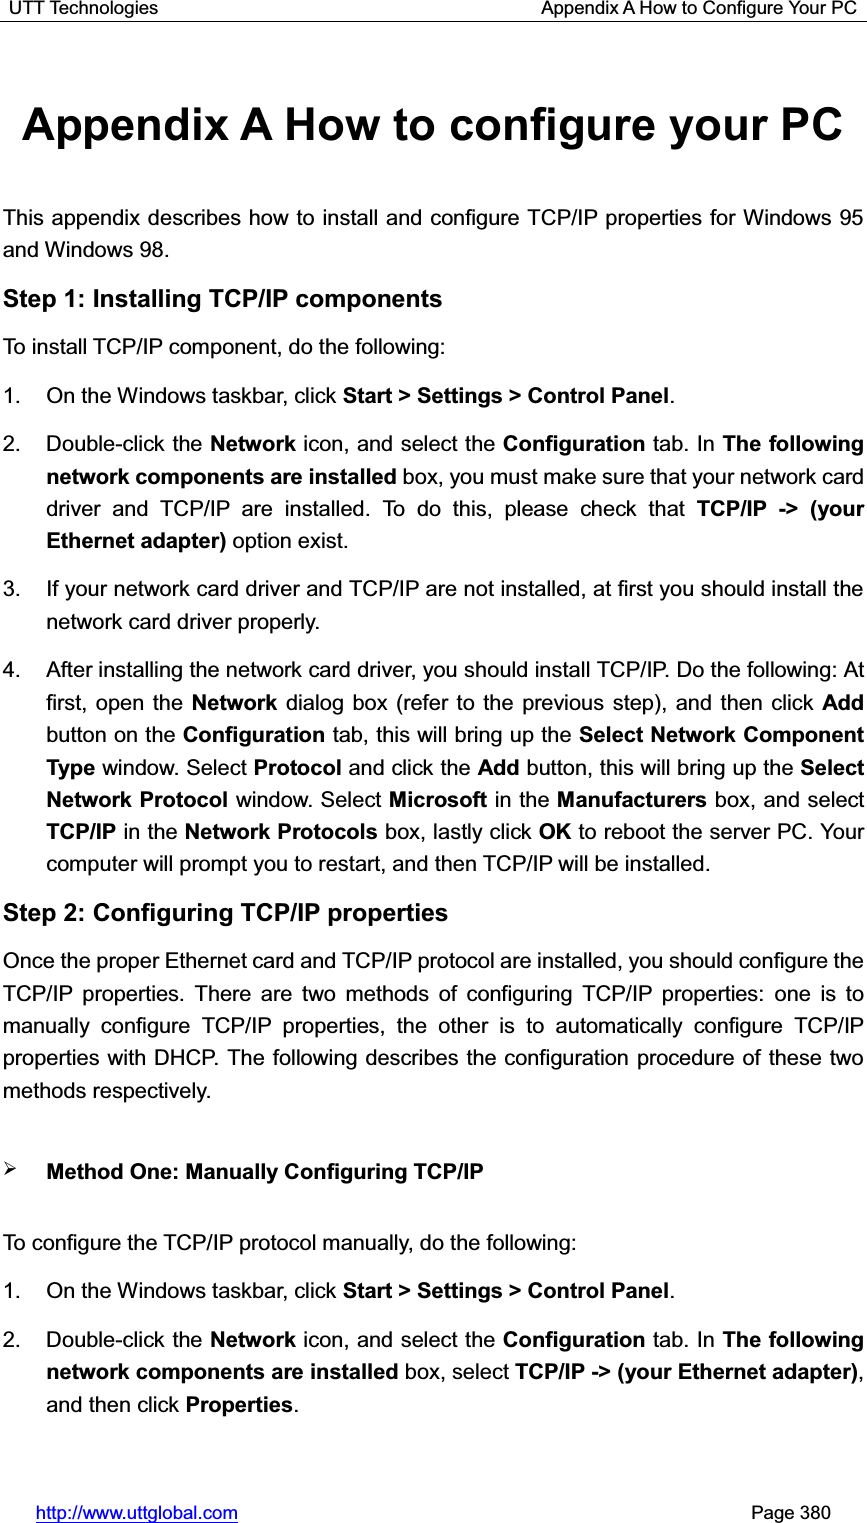 UTT Technologies                                         Appendix A How to Configure Your PC http://www.uttglobal.com                                                       Page 380 Appendix A How to configure your PC This appendix describes how to install and configure TCP/IP properties for Windows 95 and Windows 98. Step 1: Installing TCP/IP components To install TCP/IP component, do the following: 1.  On the Windows taskbar, click Start &gt; Settings &gt; Control Panel.2. Double-click the Network icon, and select the Configuration tab. In The following network components are installed box, you must make sure that your network card driver and TCP/IP are installed. To do this, please check that TCP/IP -&gt; (your Ethernet adapter) option exist. 3.  If your network card driver and TCP/IP are not installed, at first you should install the network card driver properly. 4.  After installing the network card driver, you should install TCP/IP. Do the following: At first, open the Network dialog box (refer to the previous step), and then click Add button on the Configuration tab, this will bring up the Select Network Component Type window. Select Protocol and click the Add button, this will bring up the Select Network Protocol window. Select Microsoft in the Manufacturers box, and select TCP/IP in the Network Protocols box, lastly click OK to reboot the server PC. Your computer will prompt you to restart, and then TCP/IP will be installed. Step 2: Configuring TCP/IP properties Once the proper Ethernet card and TCP/IP protocol are installed, you should configure the TCP/IP properties. There are two methods of configuring TCP/IP properties: one is to manually configure TCP/IP properties, the other is to automatically configure TCP/IP properties with DHCP. The following describes the configuration procedure of these two methods respectively. ¾Method One: Manually Configuring TCP/IP   To configure the TCP/IP protocol manually, do the following:   1.  On the Windows taskbar, click Start &gt; Settings &gt; Control Panel.2. Double-click the Network icon, and select the Configuration tab. In The following network components are installed box, select TCP/IP -&gt; (your Ethernet adapter),and then click Properties.